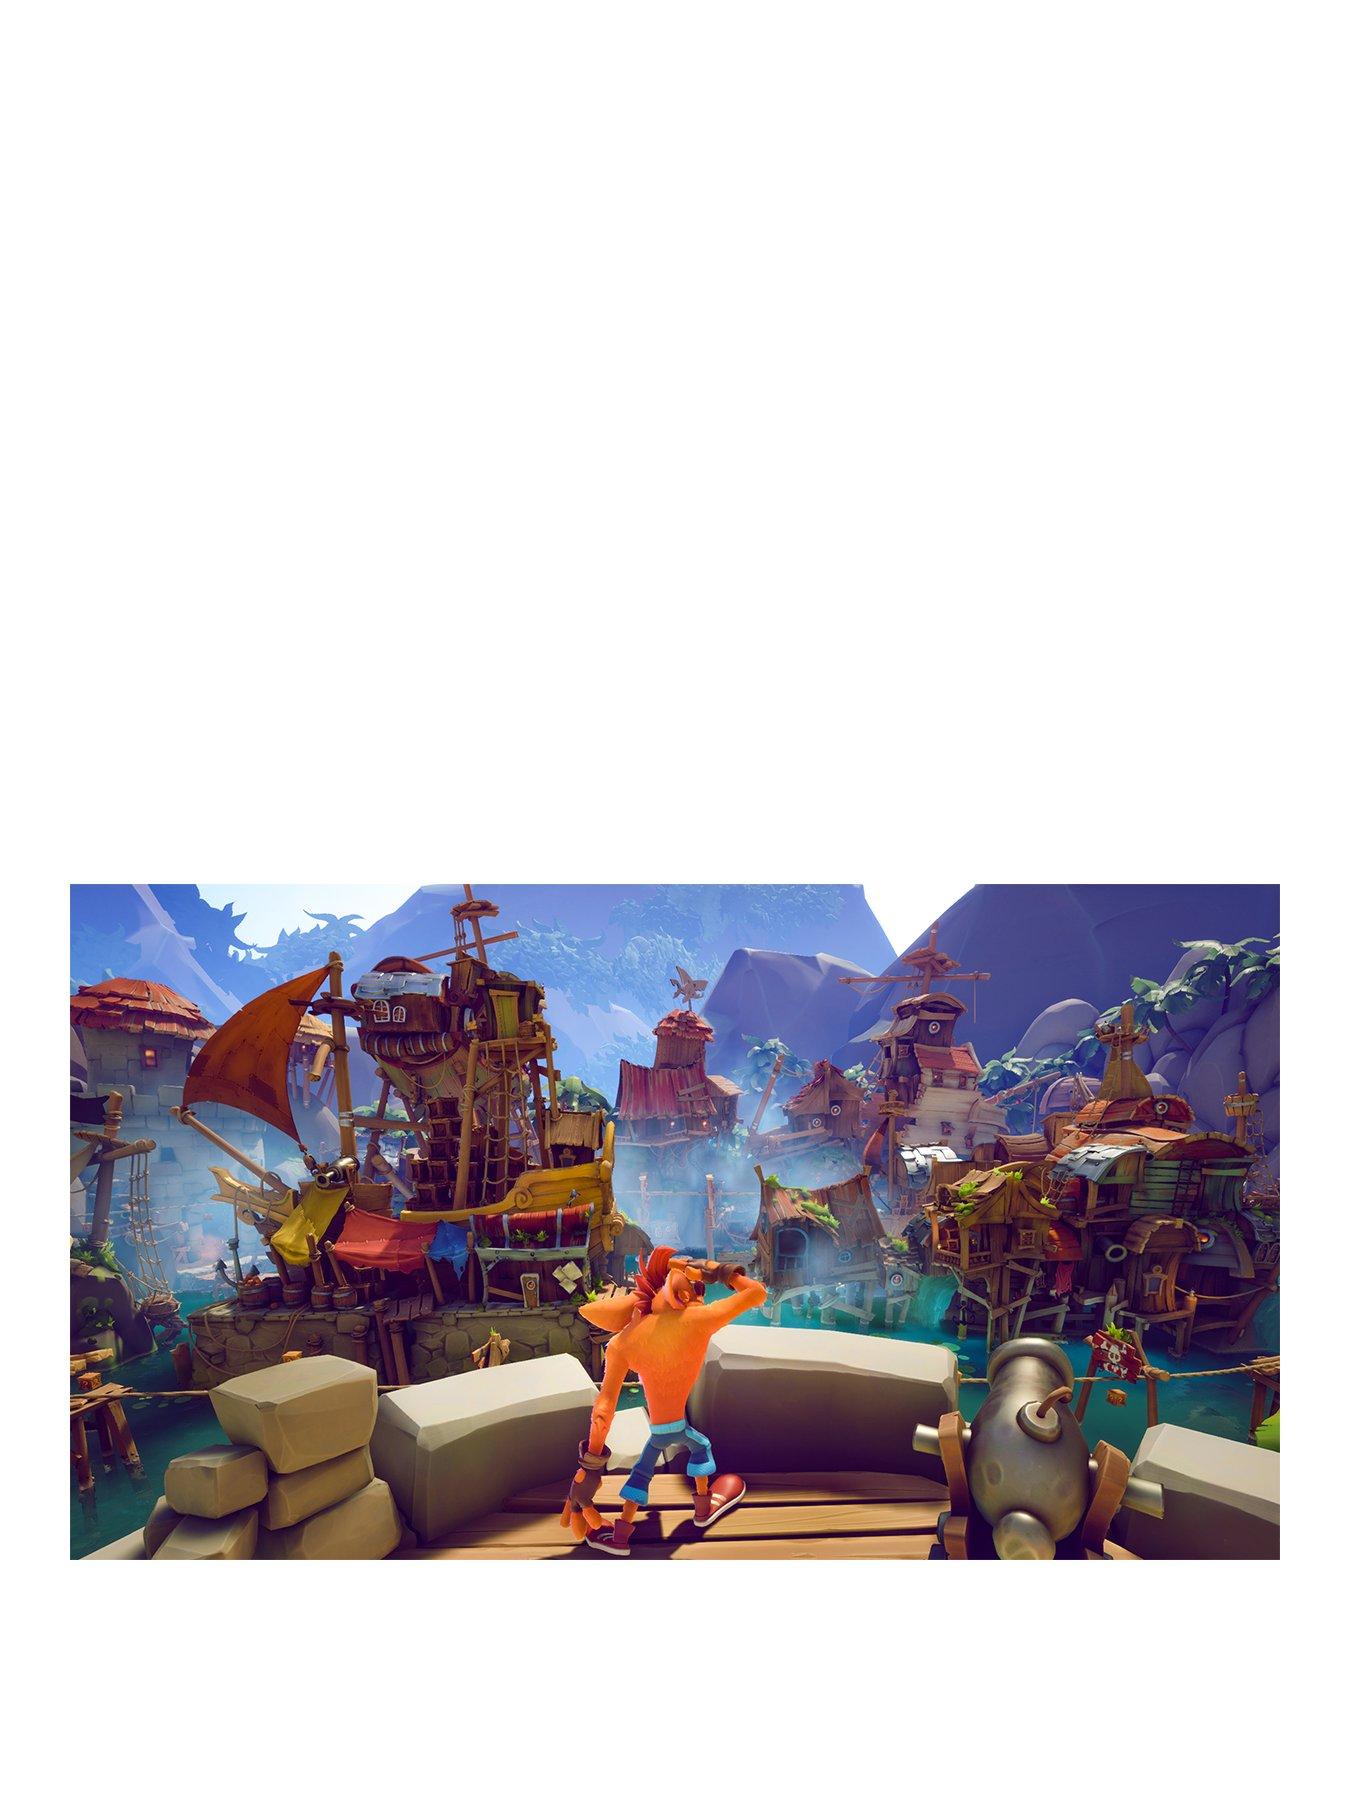 Crash Bandicoot 4: It's About Time (Nintendo Switch) BRAND NEW